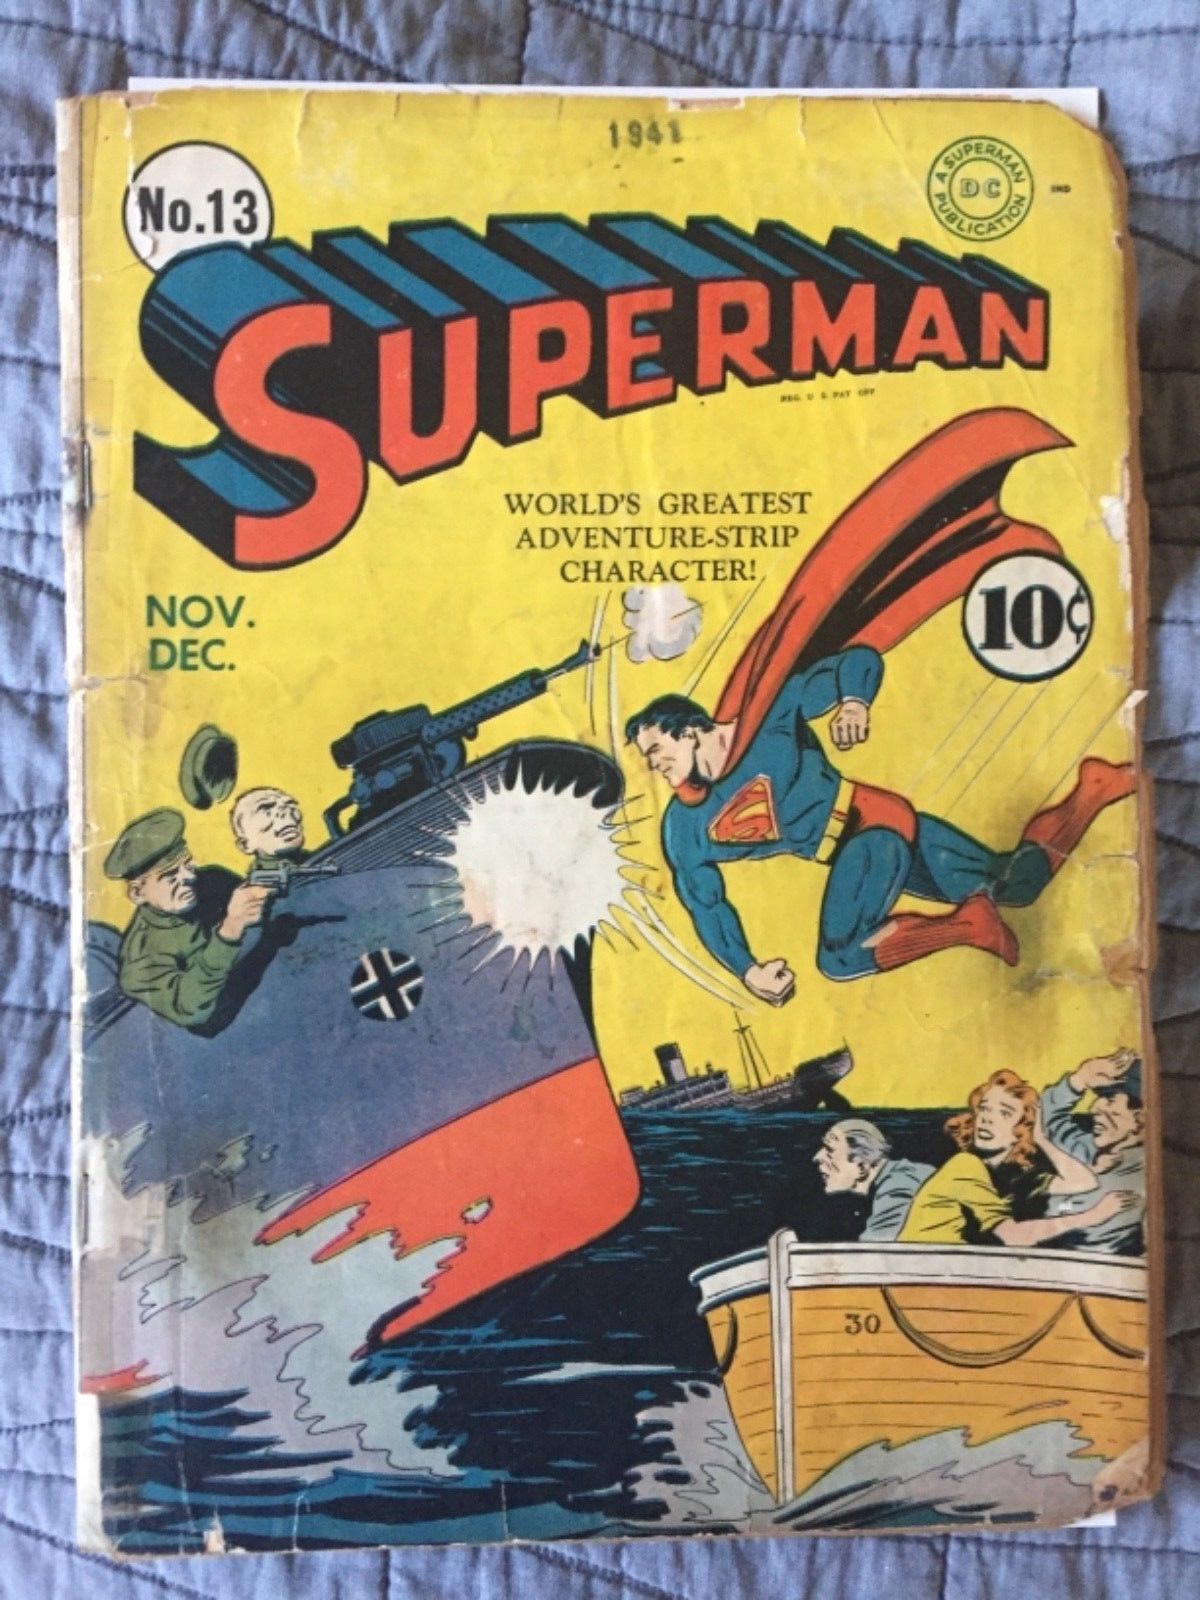 RARE 1941 GOLDEN AGE SUPERMAN #13 CLASSIC COVER COMPLETE WOW